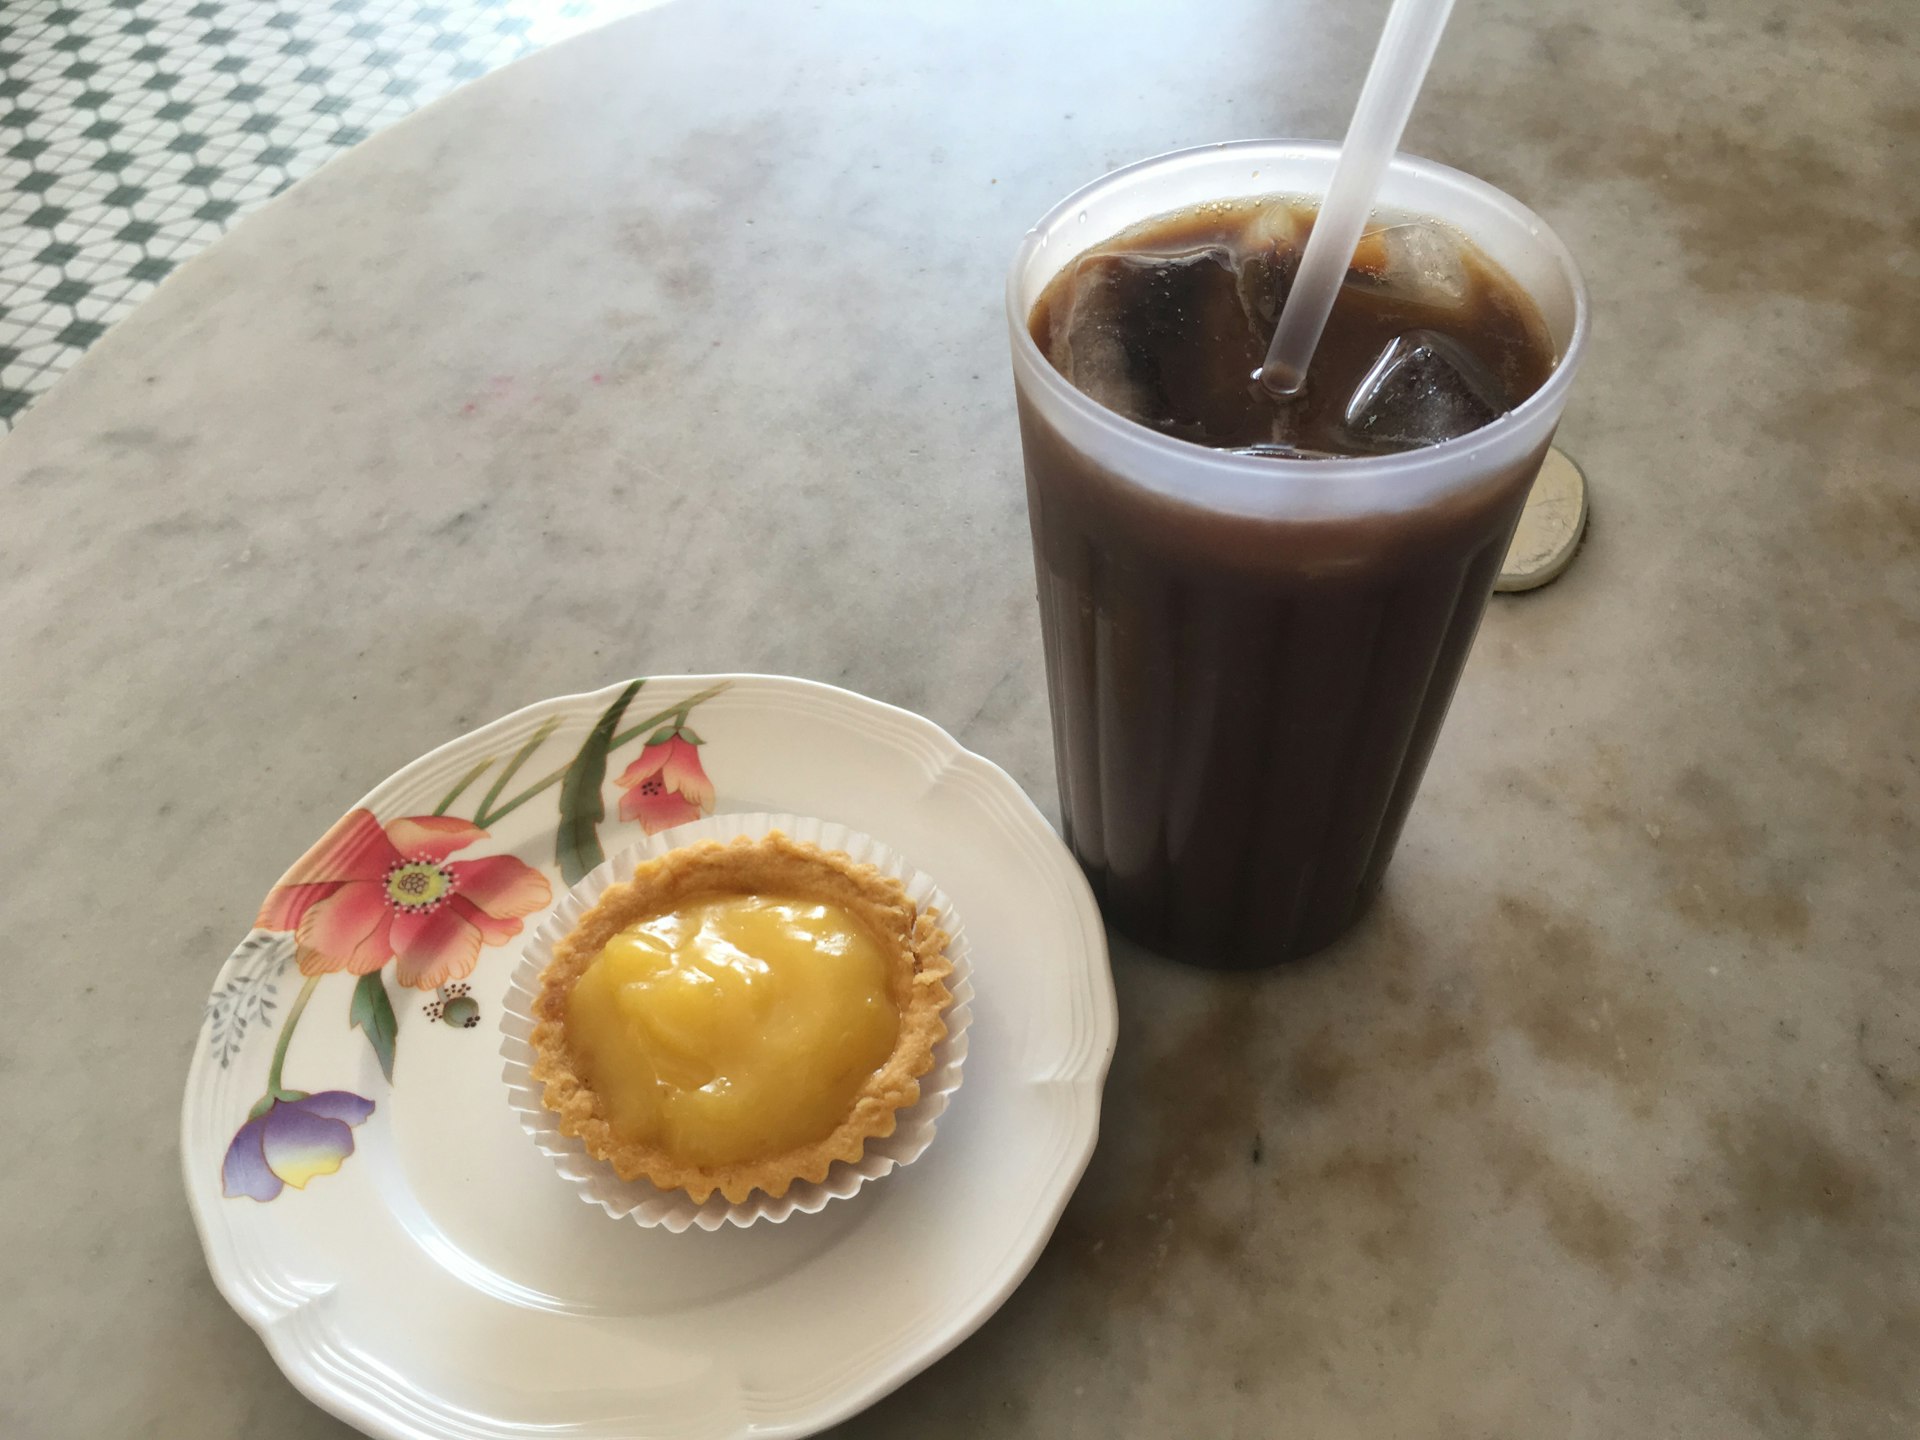 Egg tarts are the thing to try in Tong Heng, Singapore